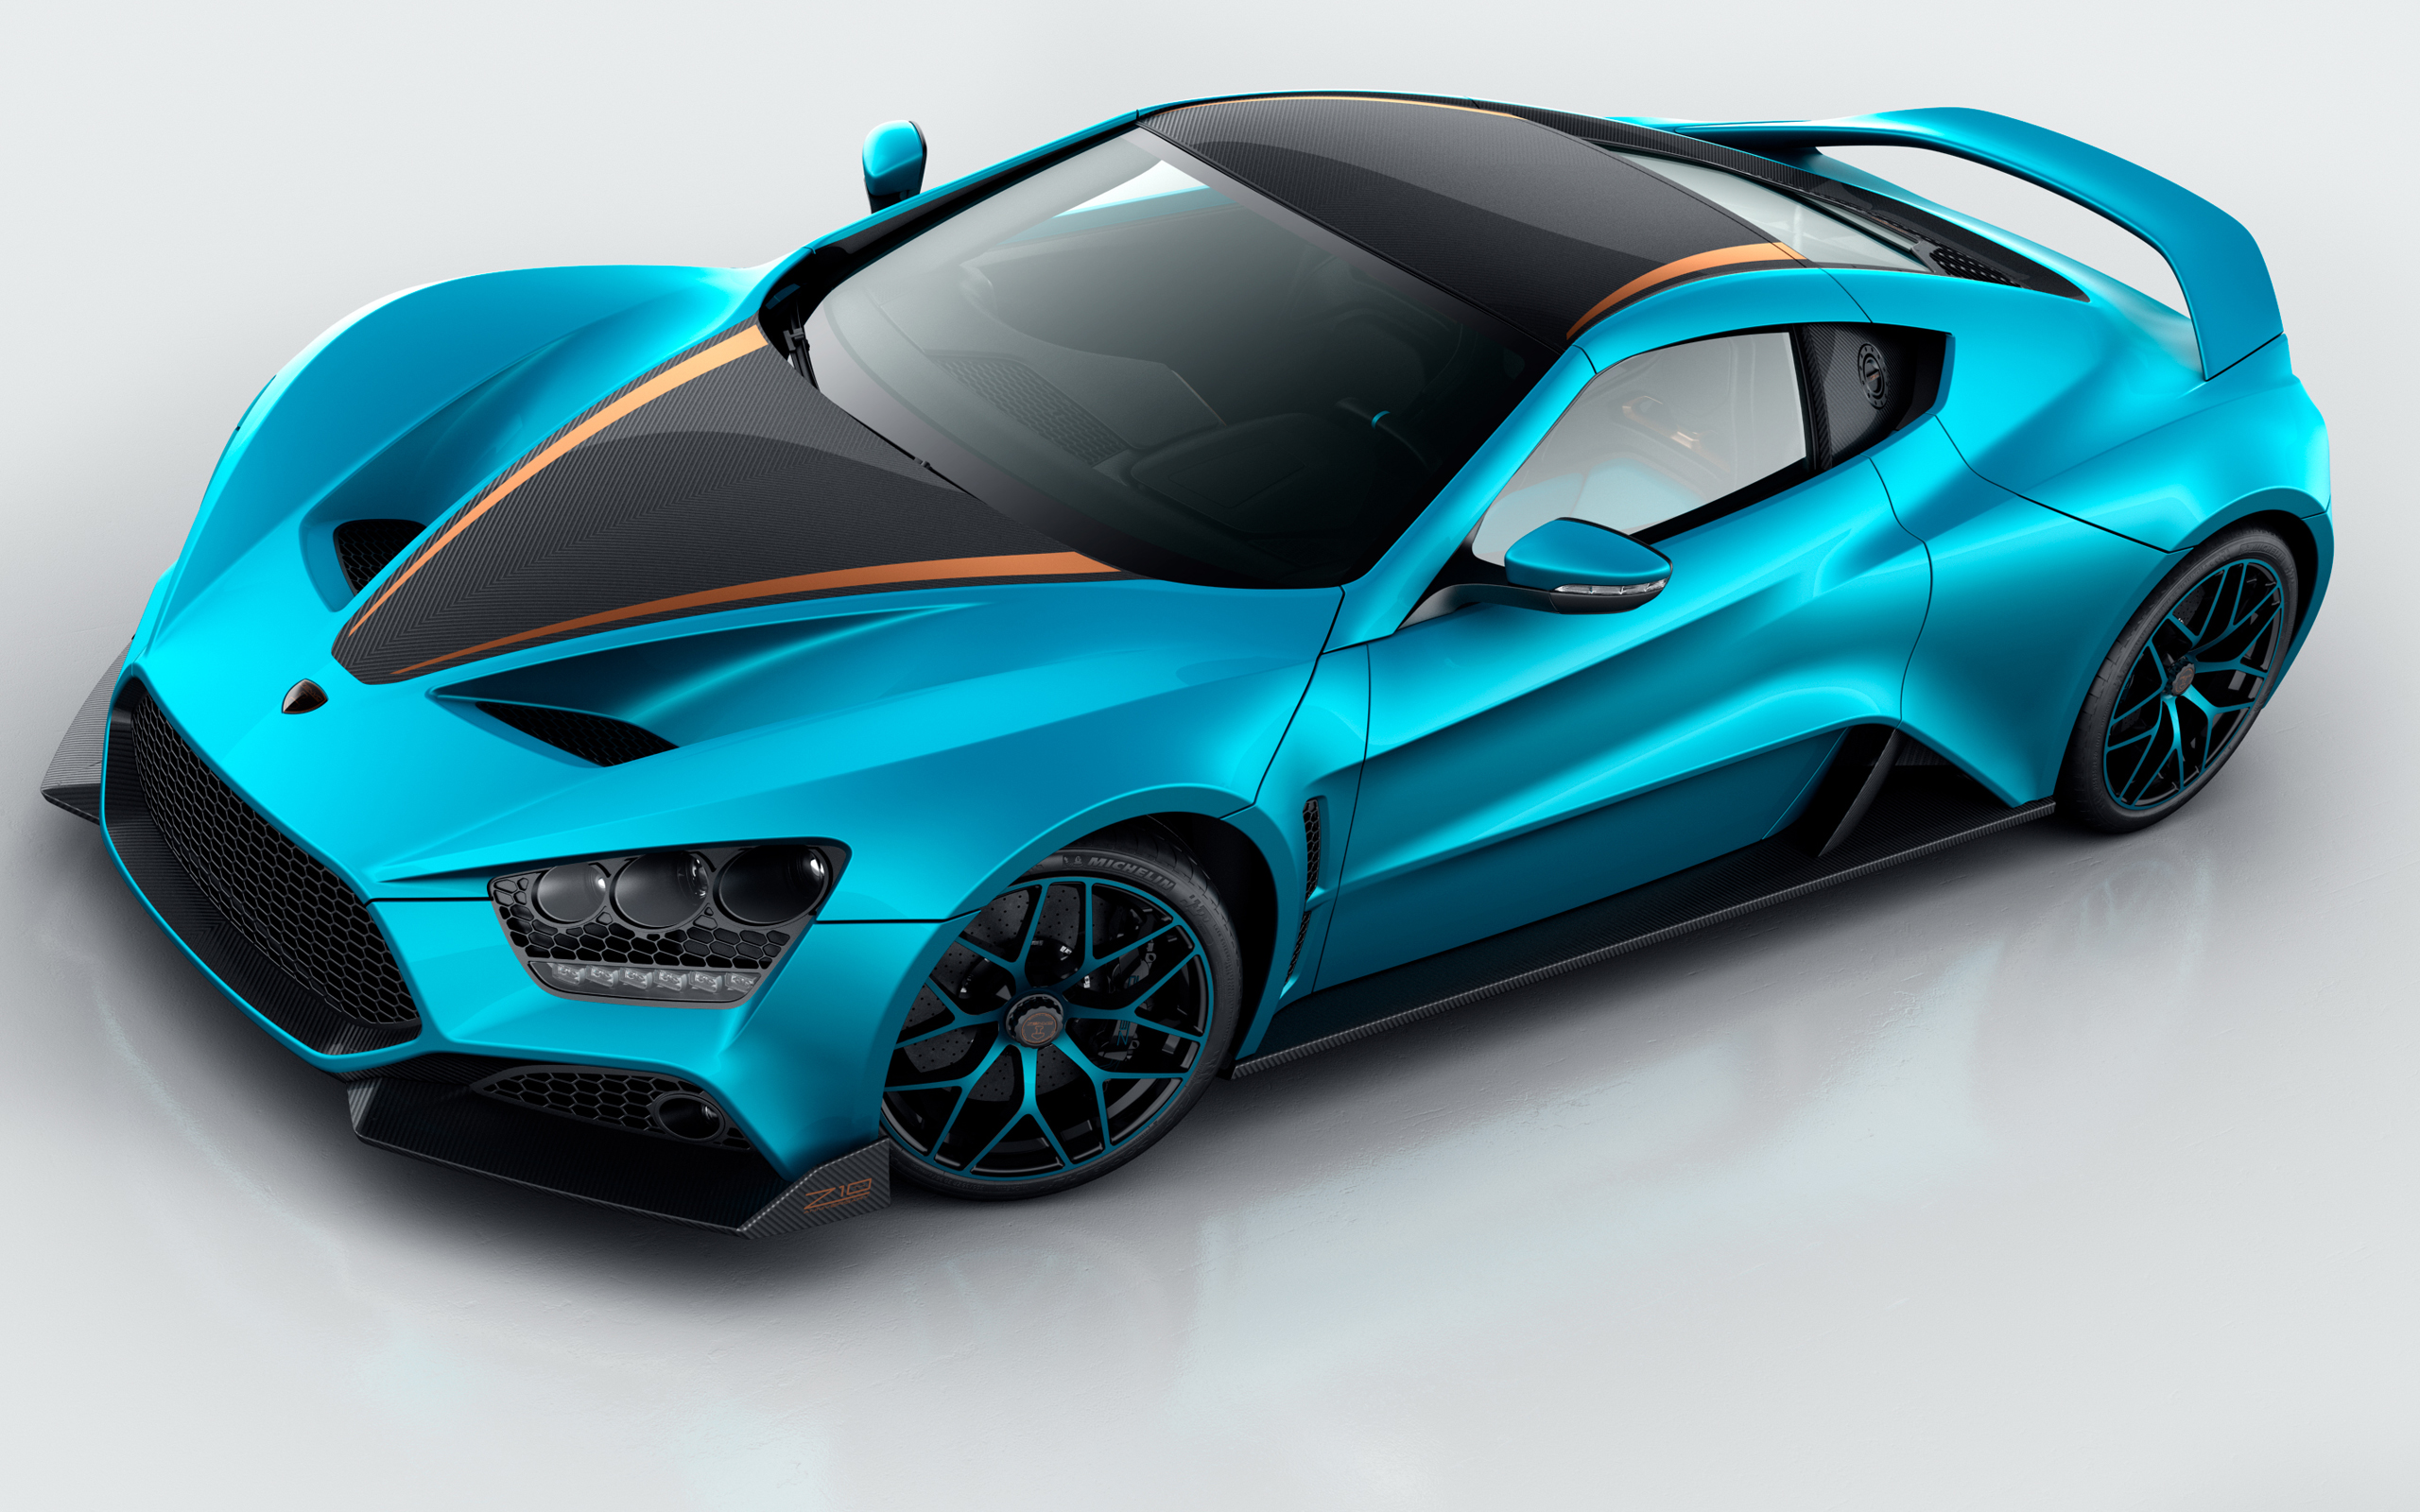 Zenvo St1 Simple Background Car Vehicle Blue Cars Front Angle View Digital Art 2560x1600